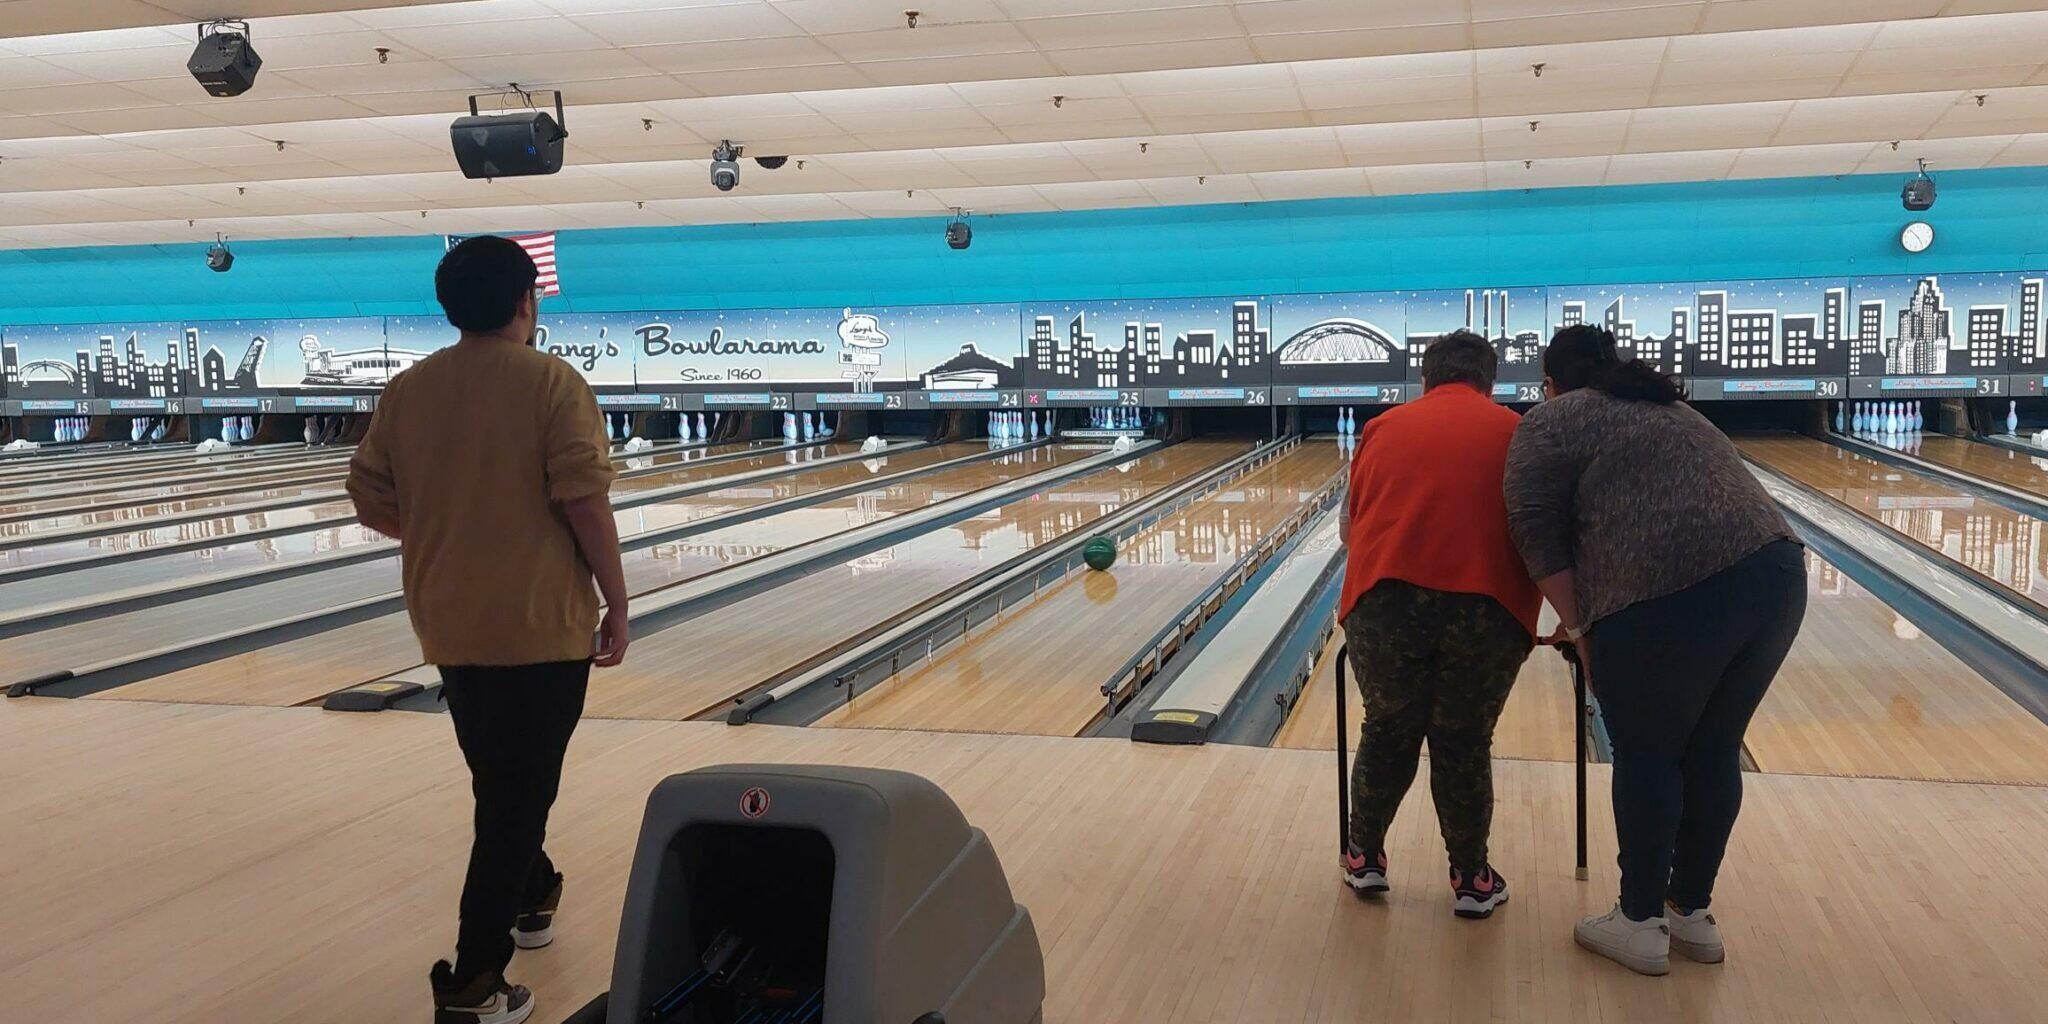 A group of participants bowling at a bowling alley